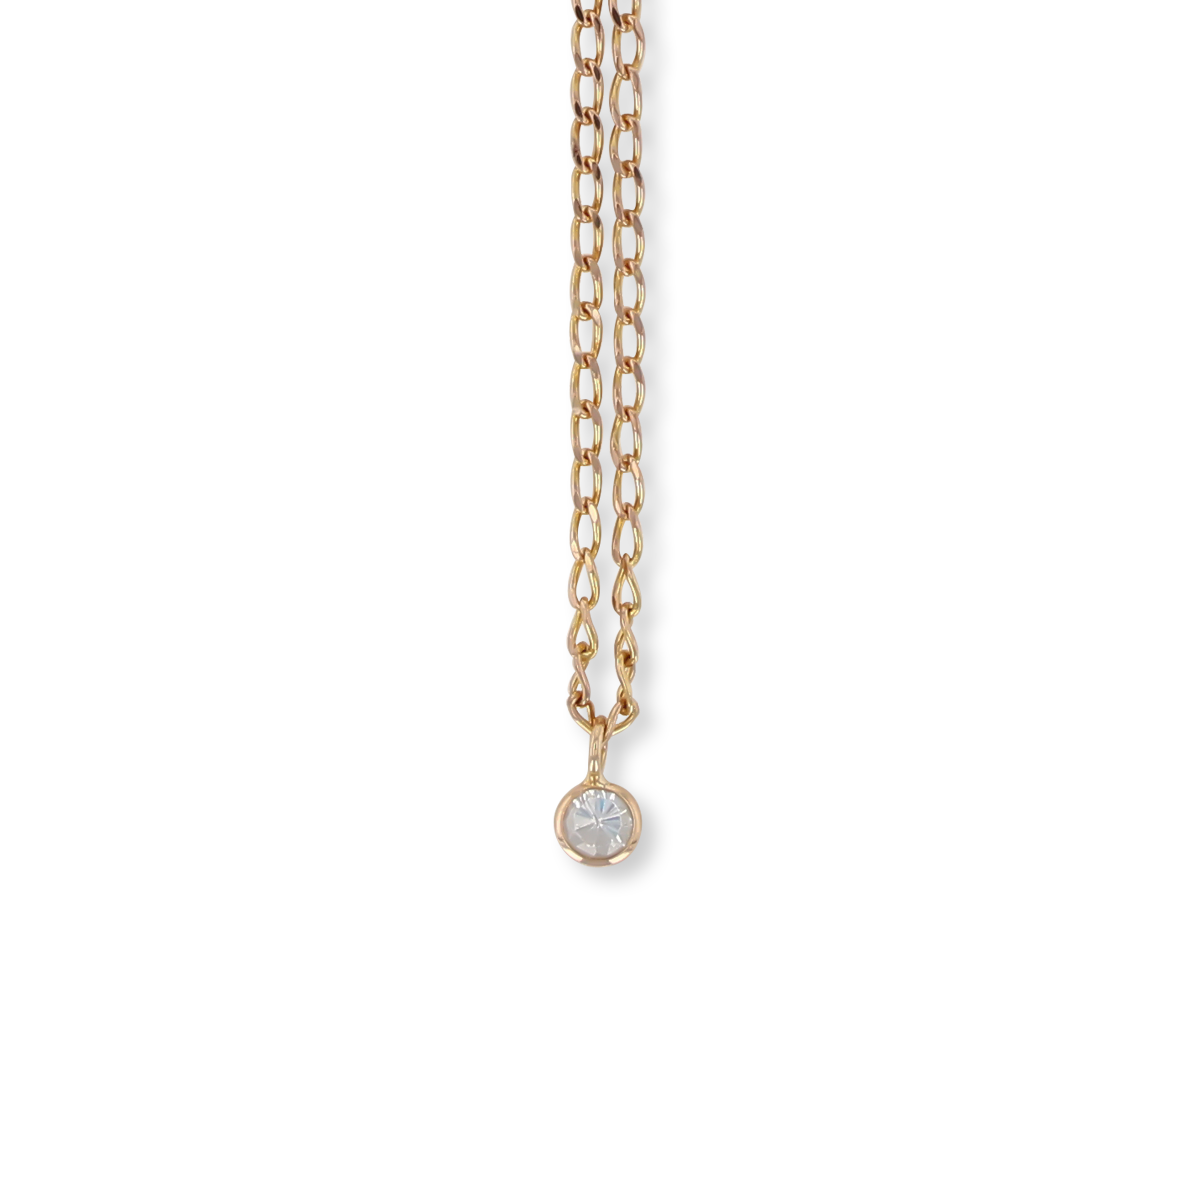 9ct Yellow Gold Cubic Zirconia Curb Link Tie Chain with Button Attachment